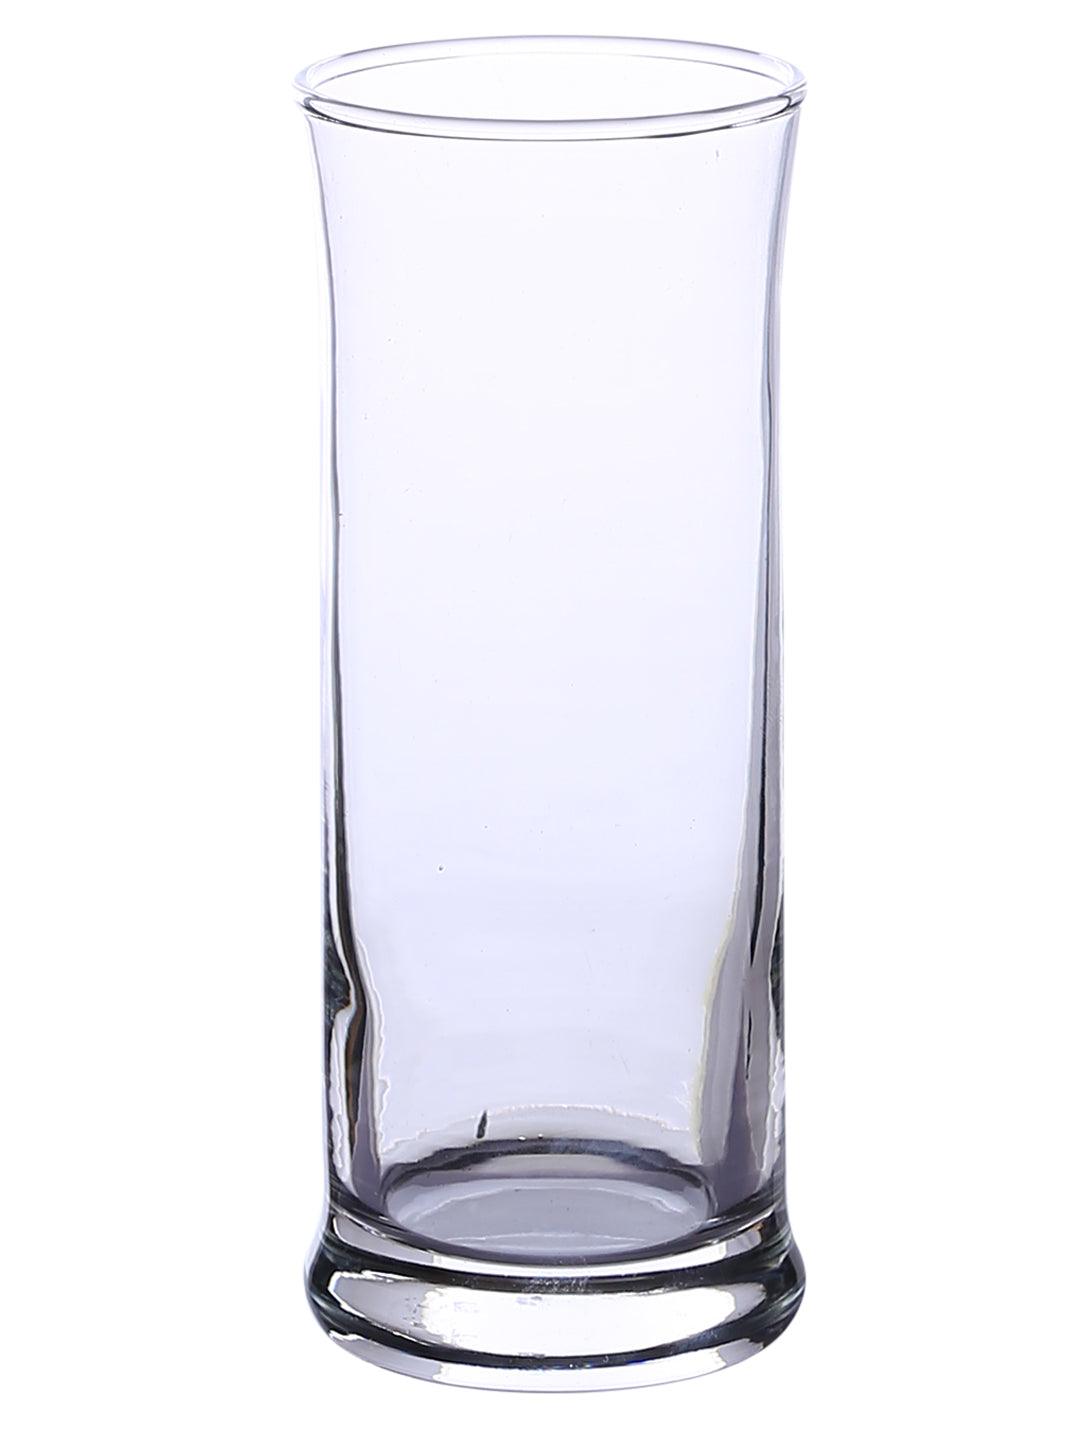 Uniglass Frappe Cocktail & Coffee Drinking Glass 290 ML, Set of 6 pcs | Juice & Water glass